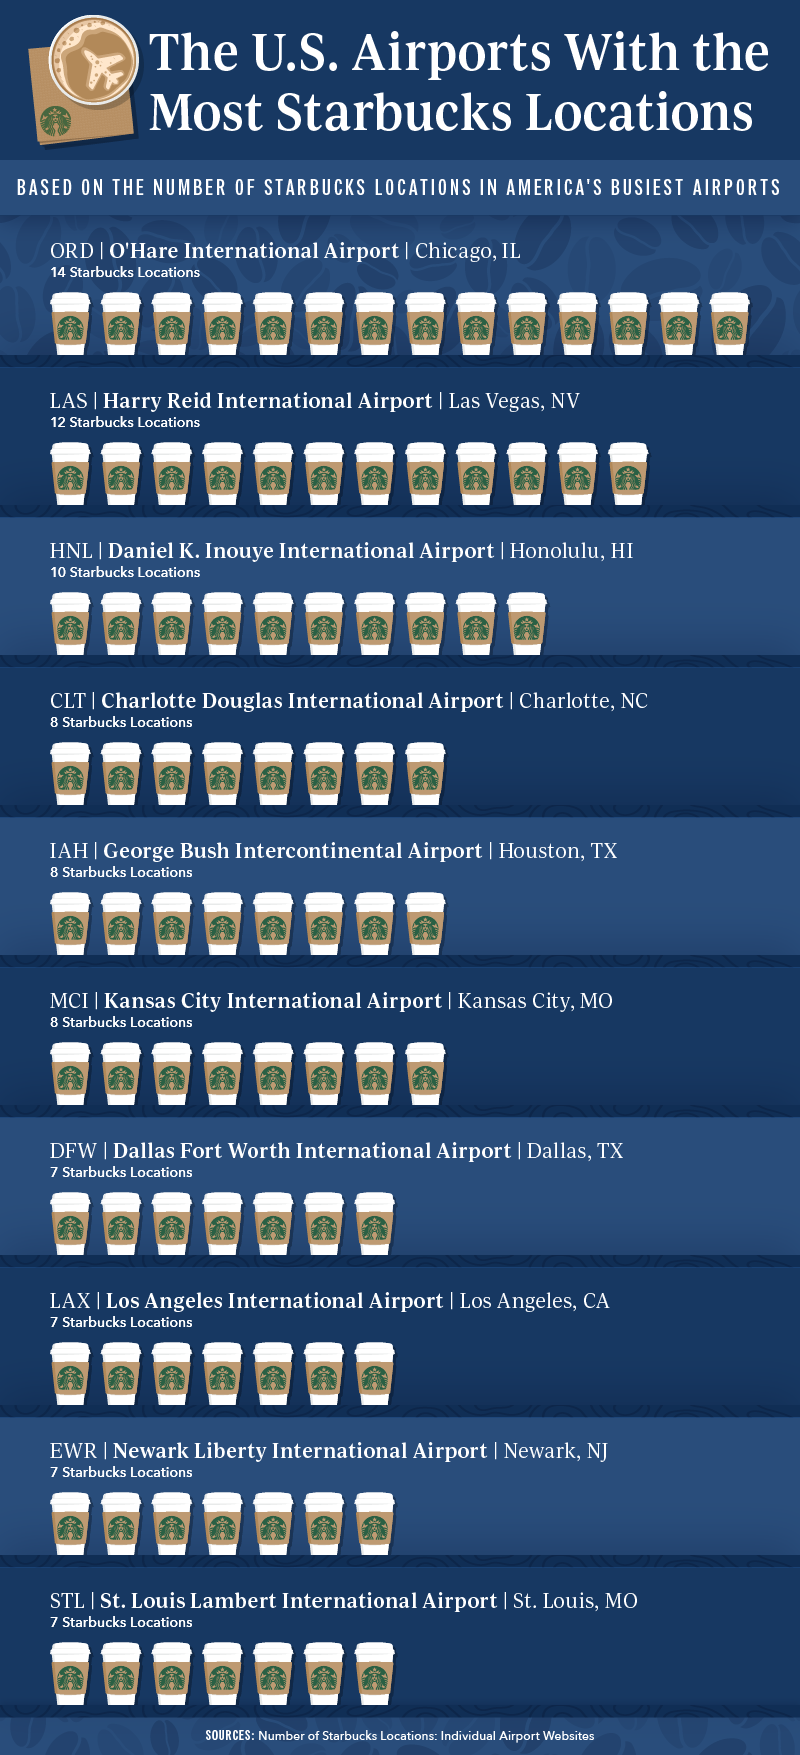 A chart depicting the 10 major U.S. airports with the most overall Starbucks locations